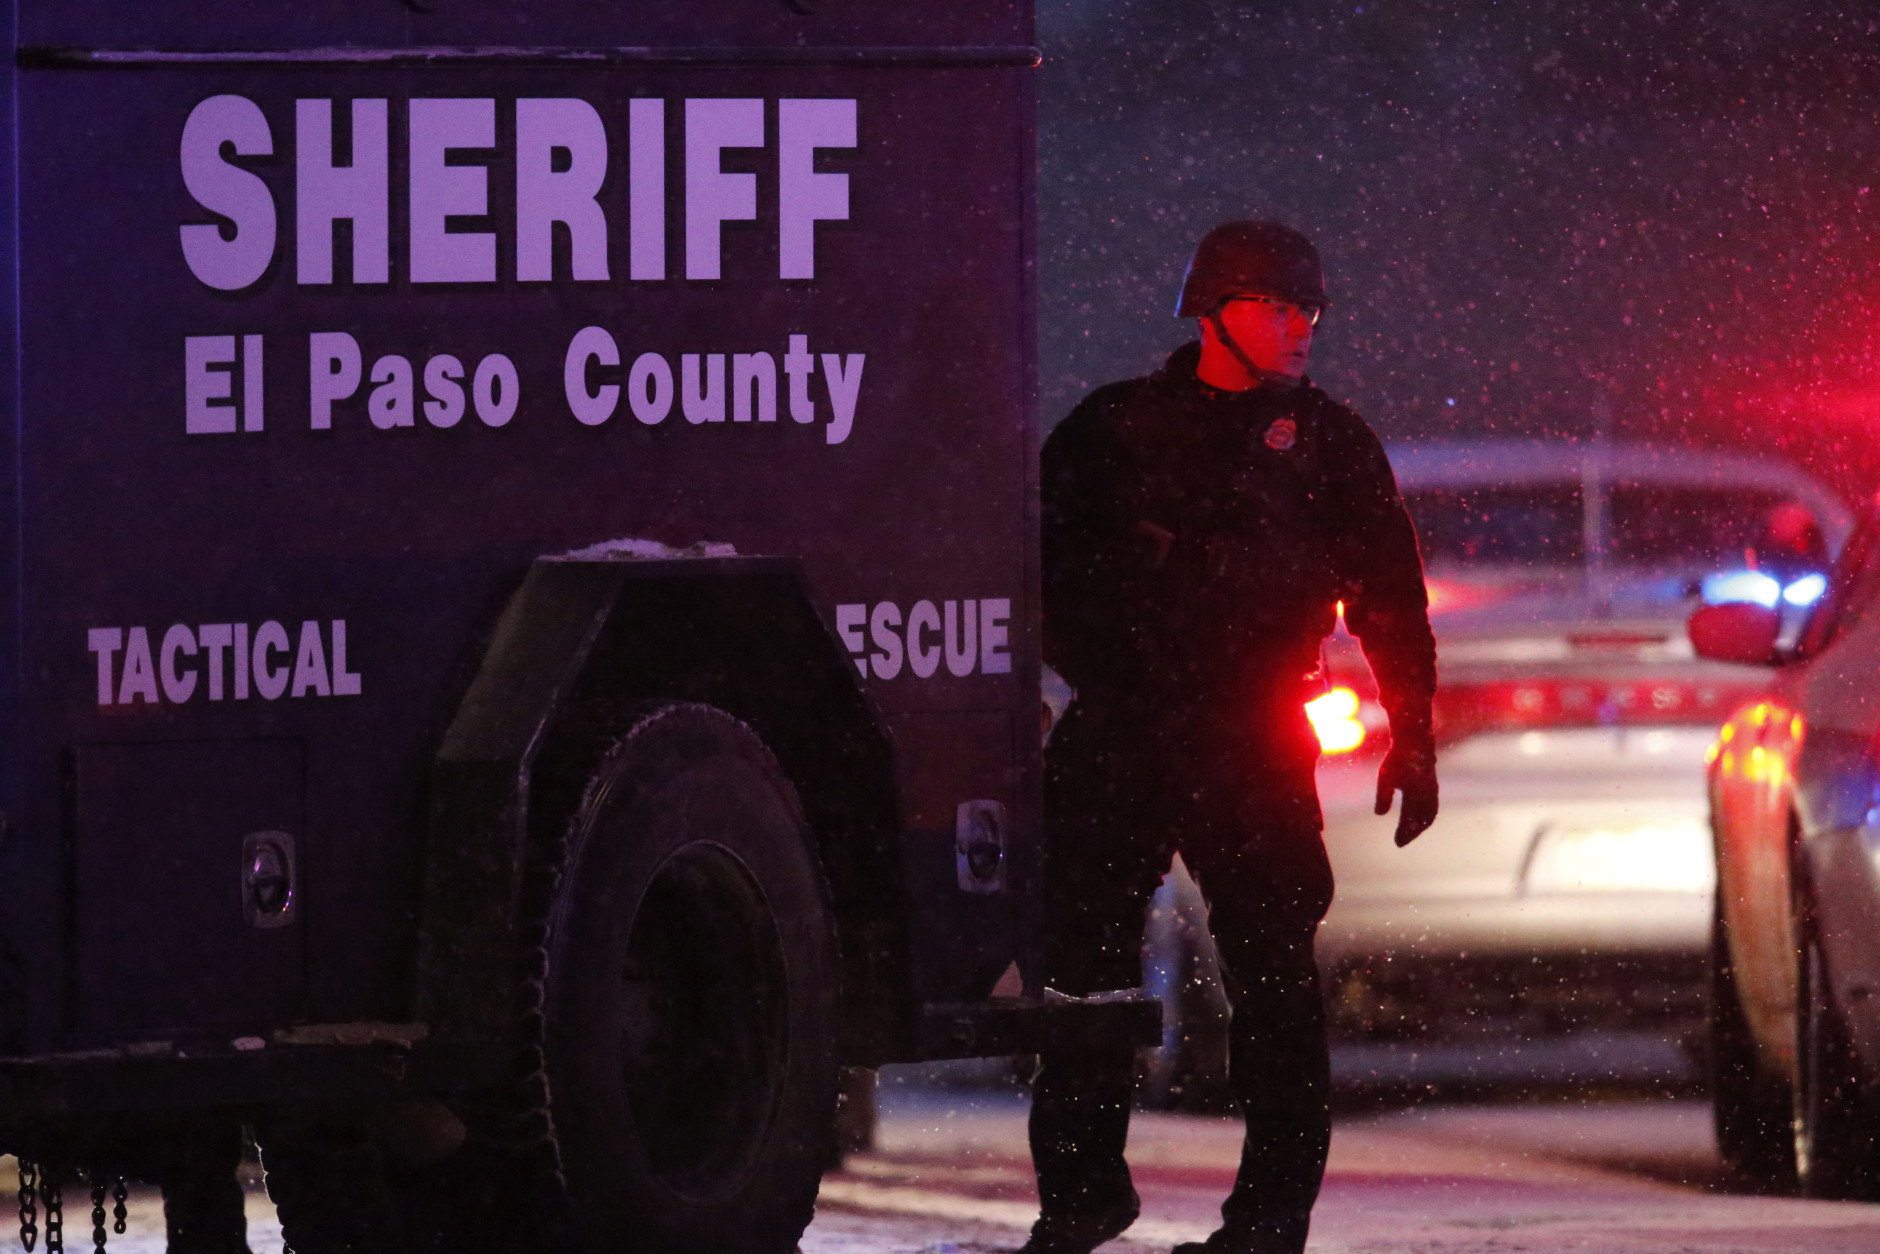 Police stand guard after a suspect was apprehended Friday, Nov. 27, 2015, in northwest Colorado Springs, Colo. A gunman opened fire at a Planned Parenthood clinic on Friday, authorities said, wounding multiple people. (AP Photo/David Zalubowski)